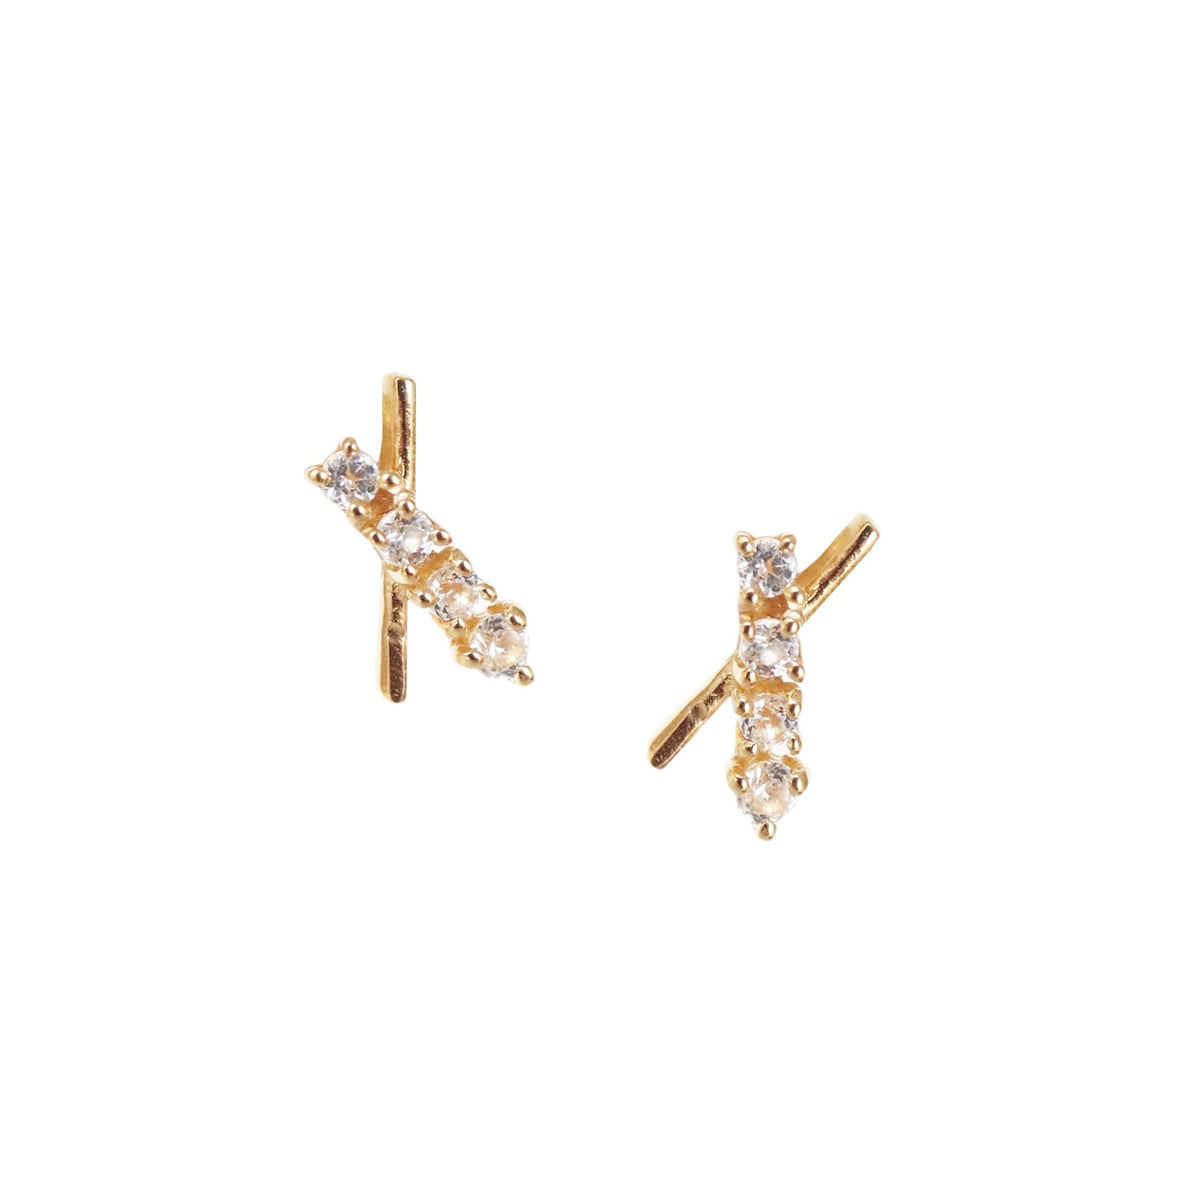 TINY DREAM STARDUST STUDS - CUBIC ZIRCONIA &amp; GOLD - SO PRETTY CARA COTTER